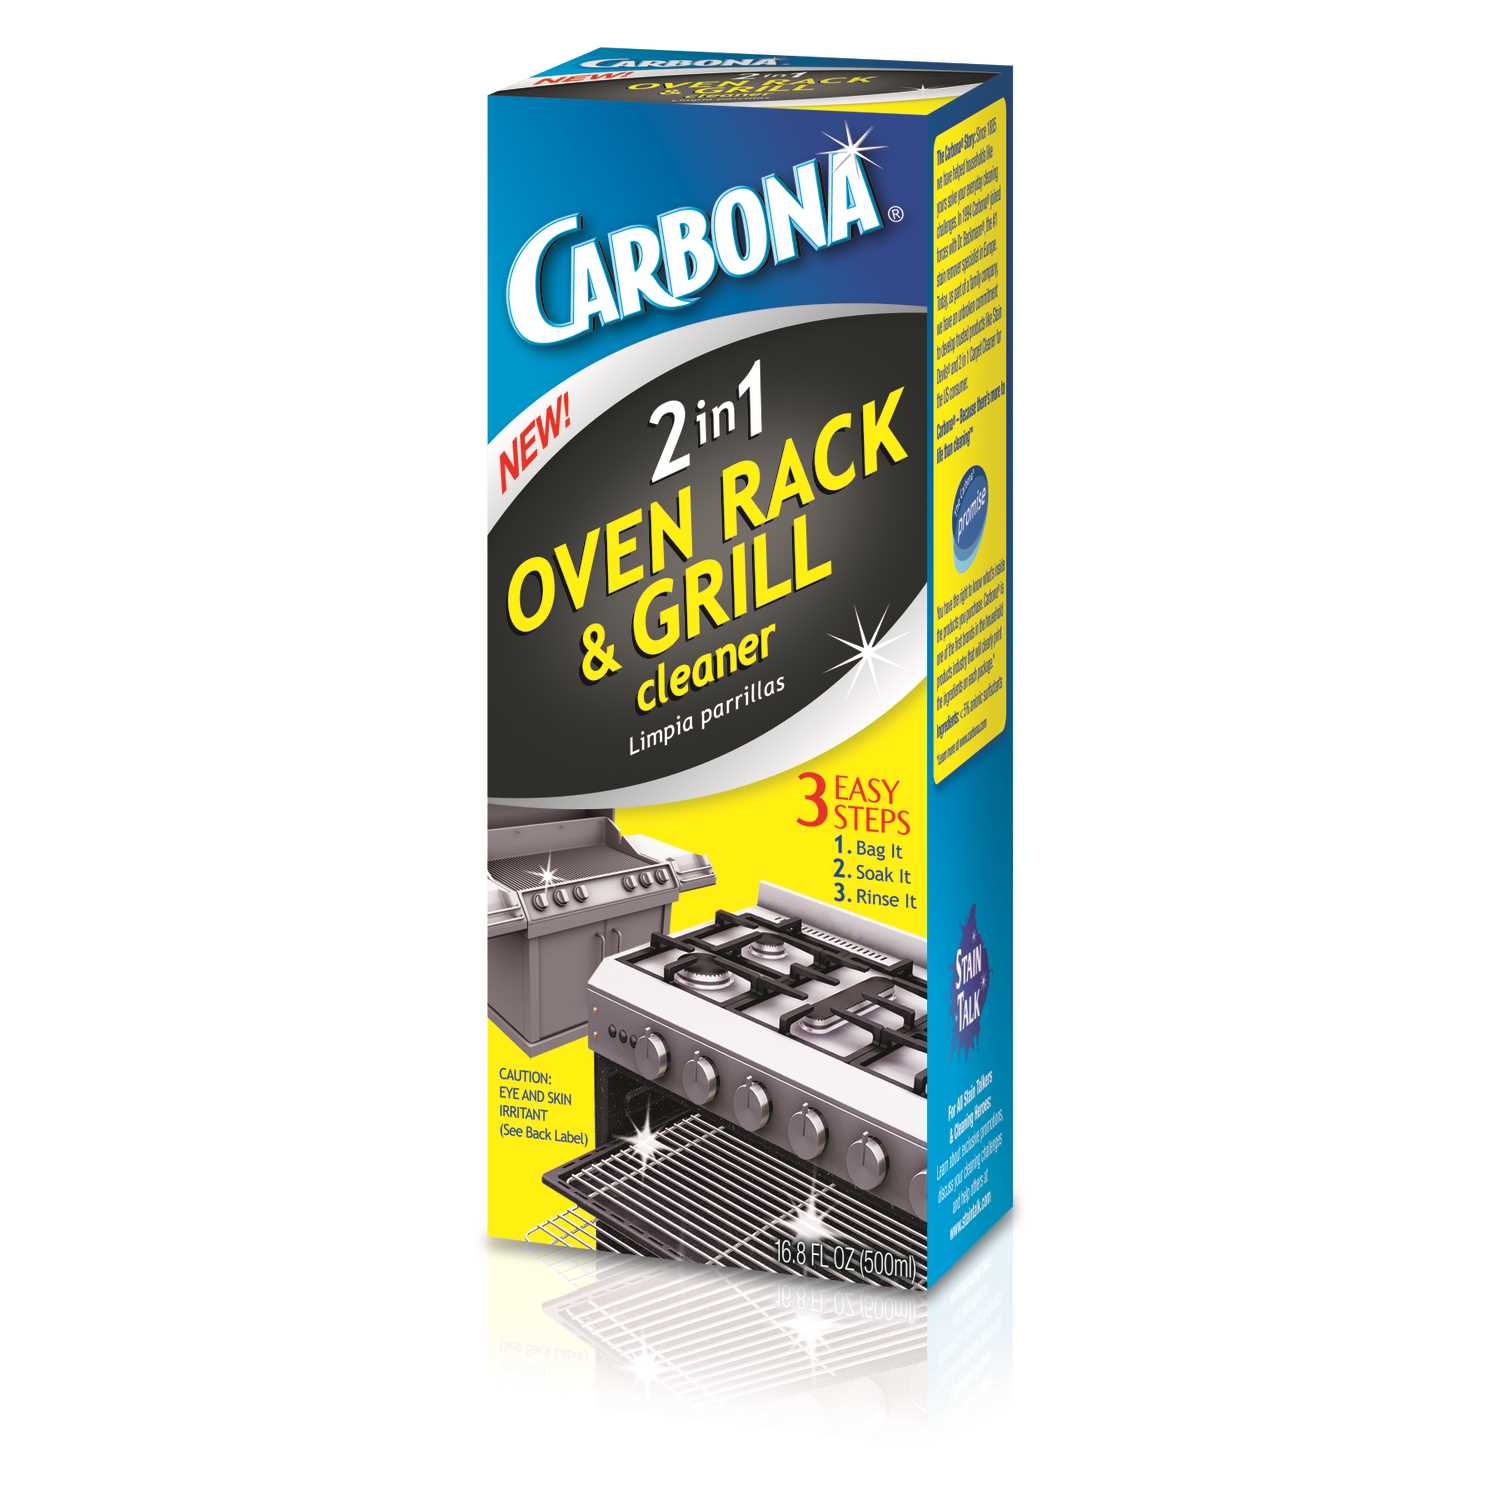 Carbona Biodegradable Oven Cleaner, 16.8 oz (Pack of 2)